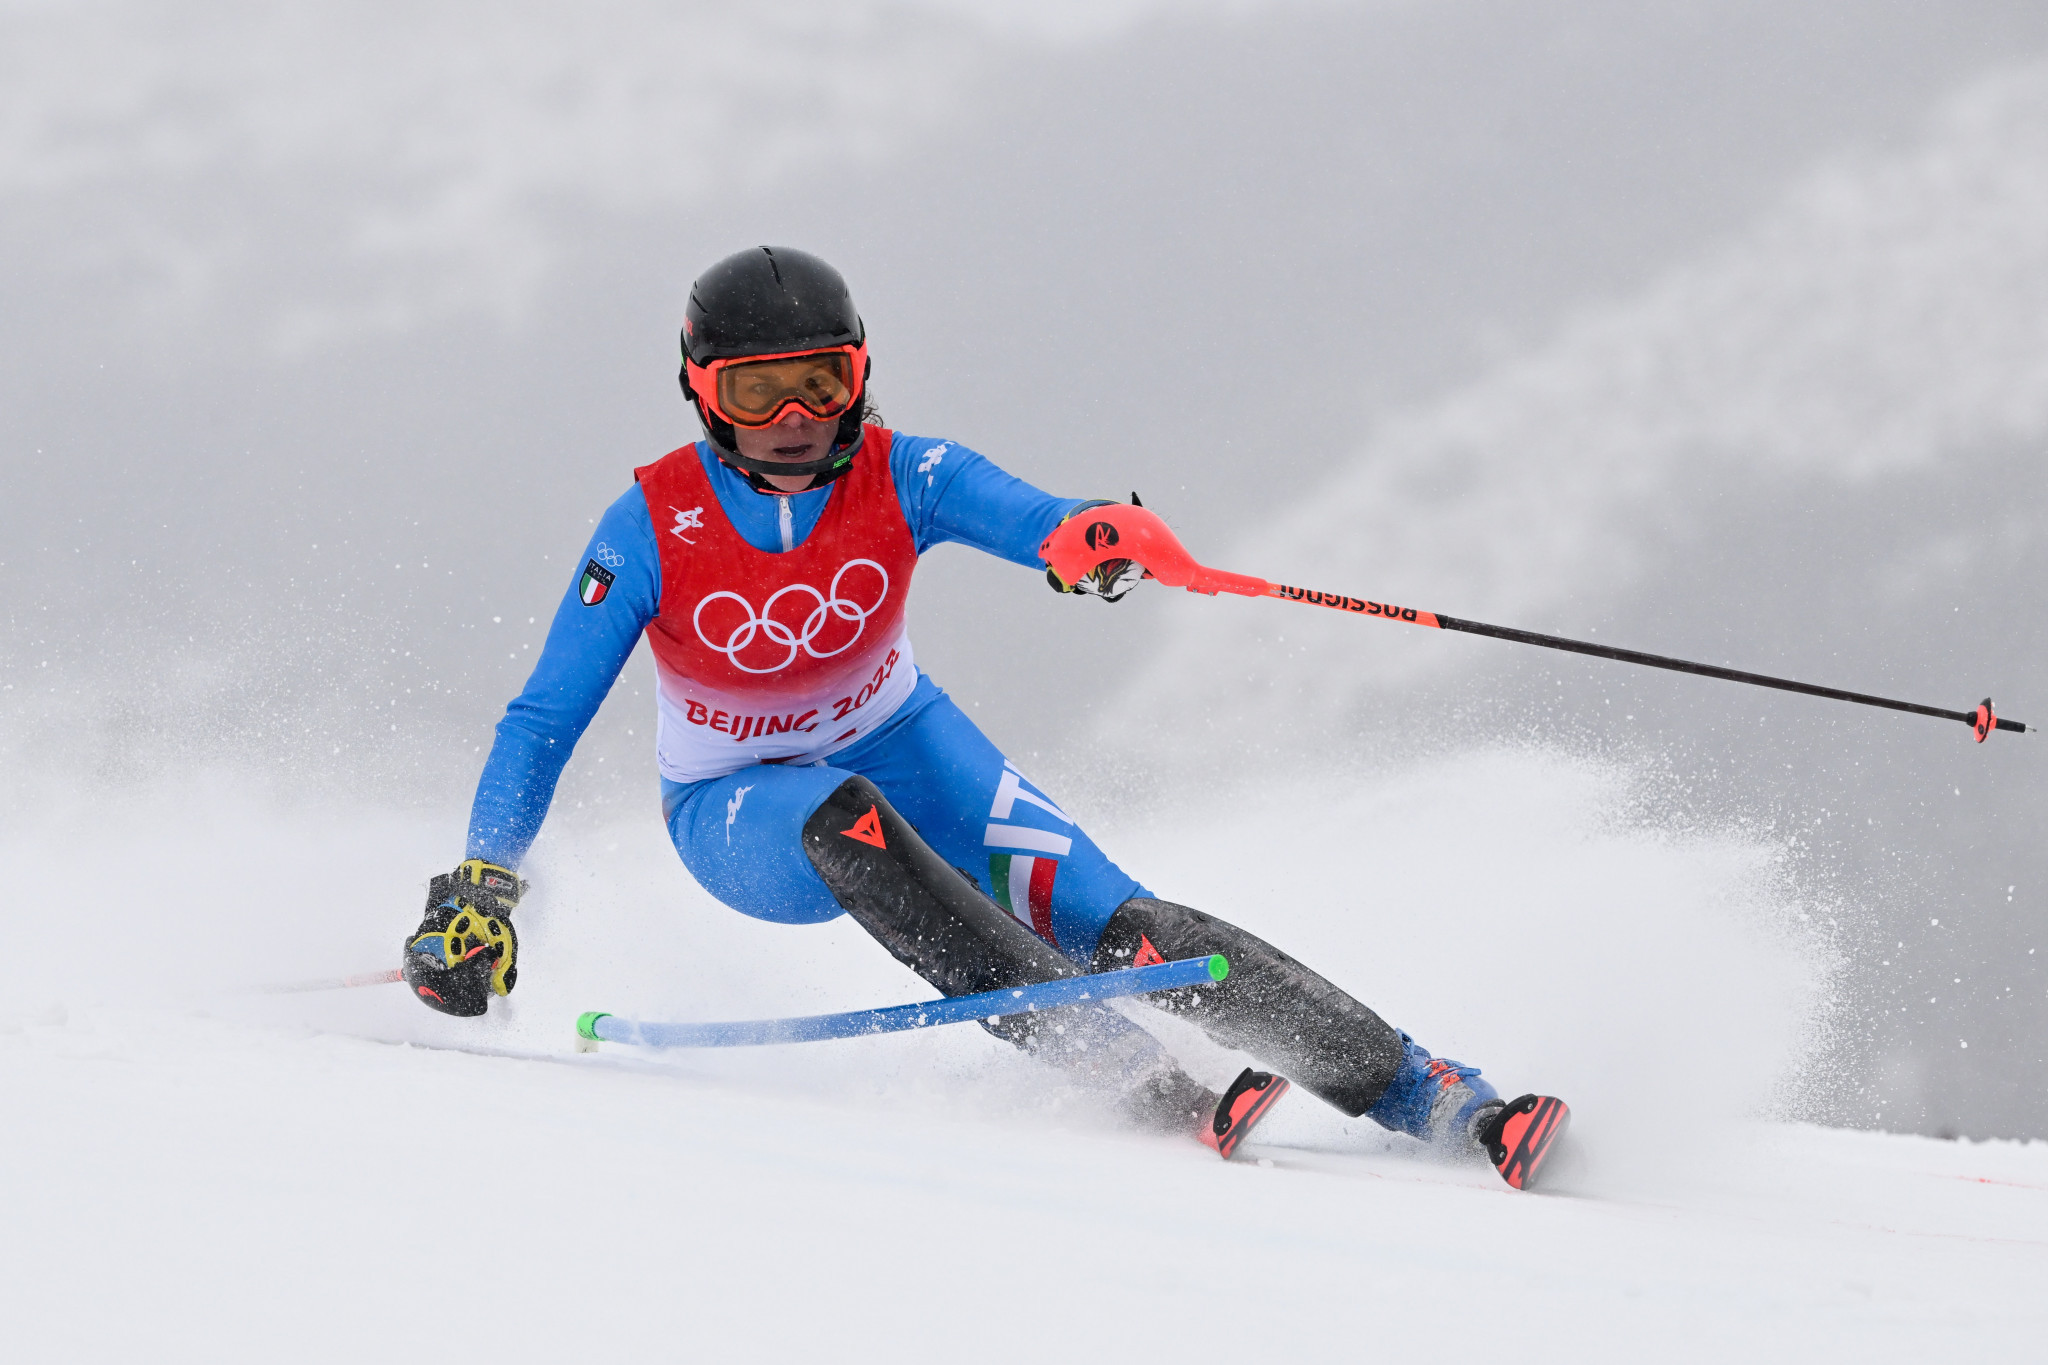 Federica Brignone won giant slalom silver and combined bronze at Beijing 2022 but has ruled herself out of competing at Milan Cortina 2026 because she claims there will be "no Olympic spirit" ©Getty Images